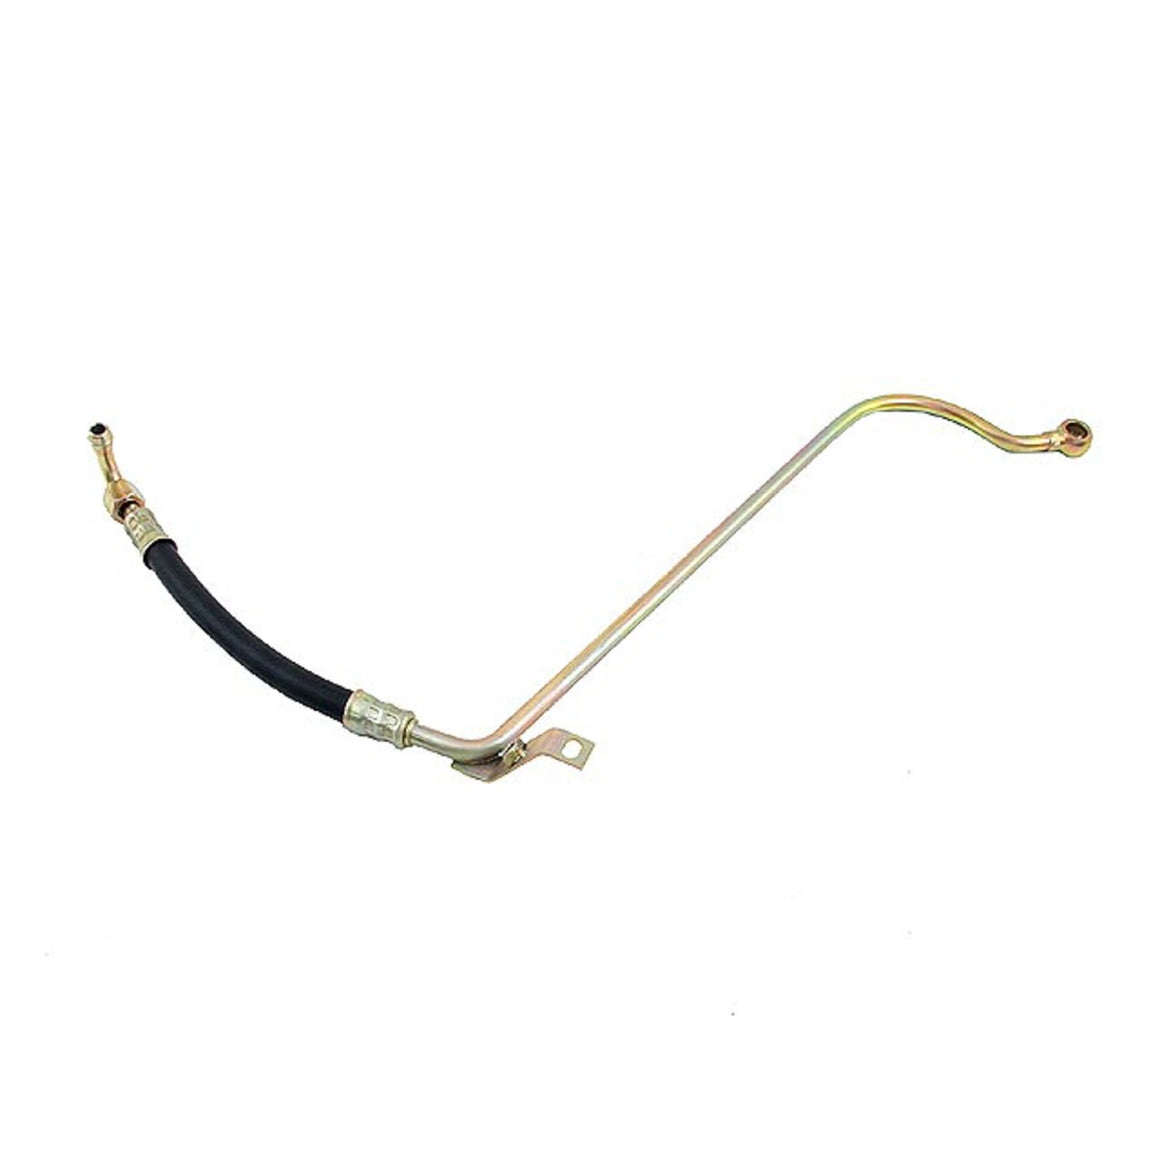 (New) 911/930/964 Engine to Turbo Oil Line Feed Pipe - 1976-92